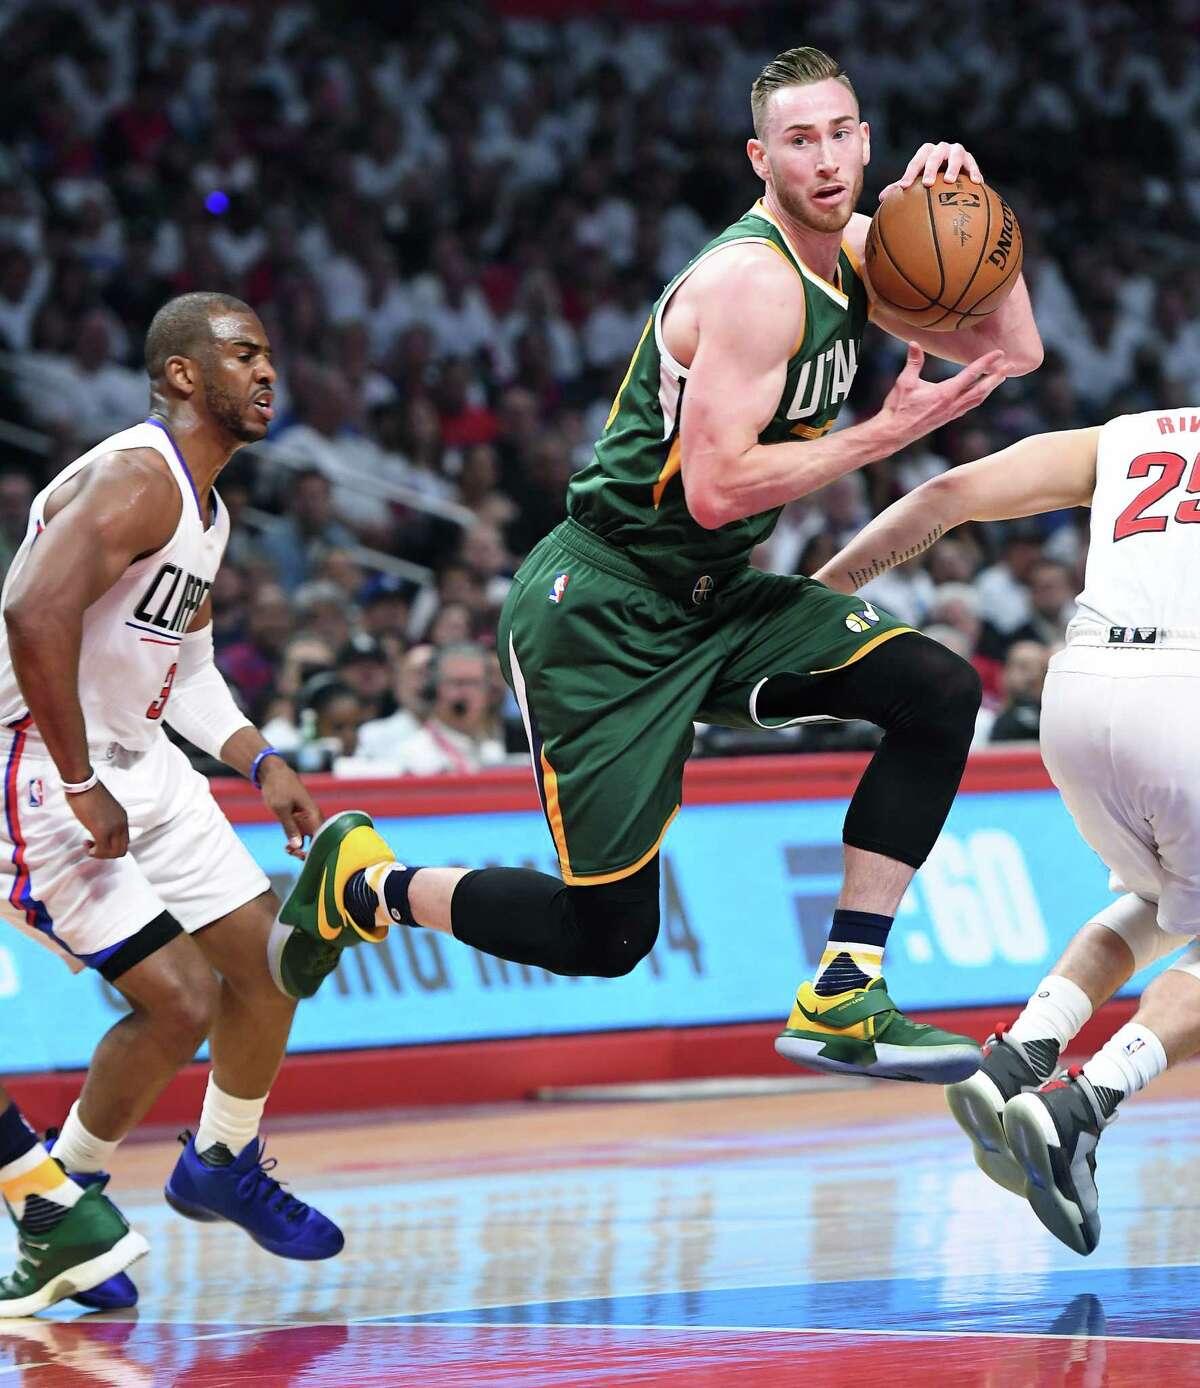 Gordon Hayward, who has reached a deal with the Celtics, averaged a career-best 21.9 points last season for the Jazz and was an All-Star for the first time.